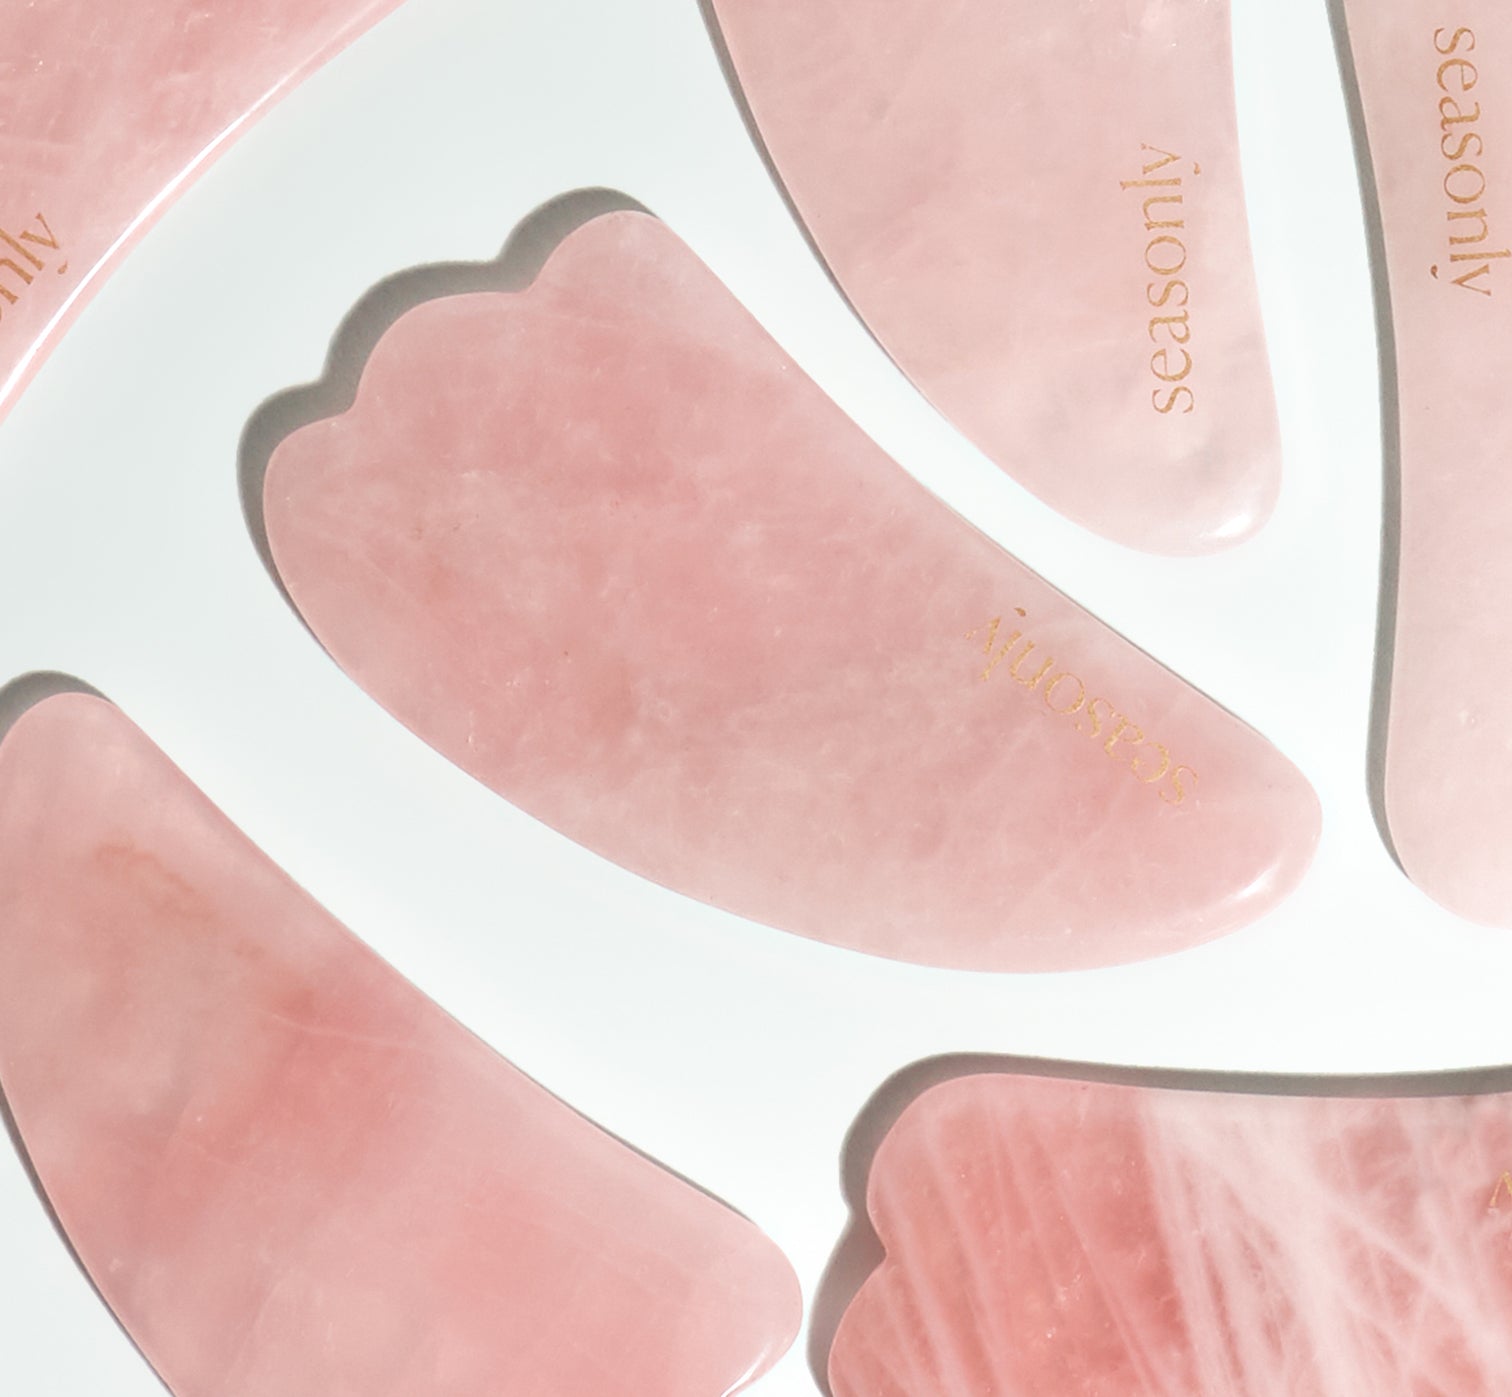 Why use a Gua Sha to massage your face?